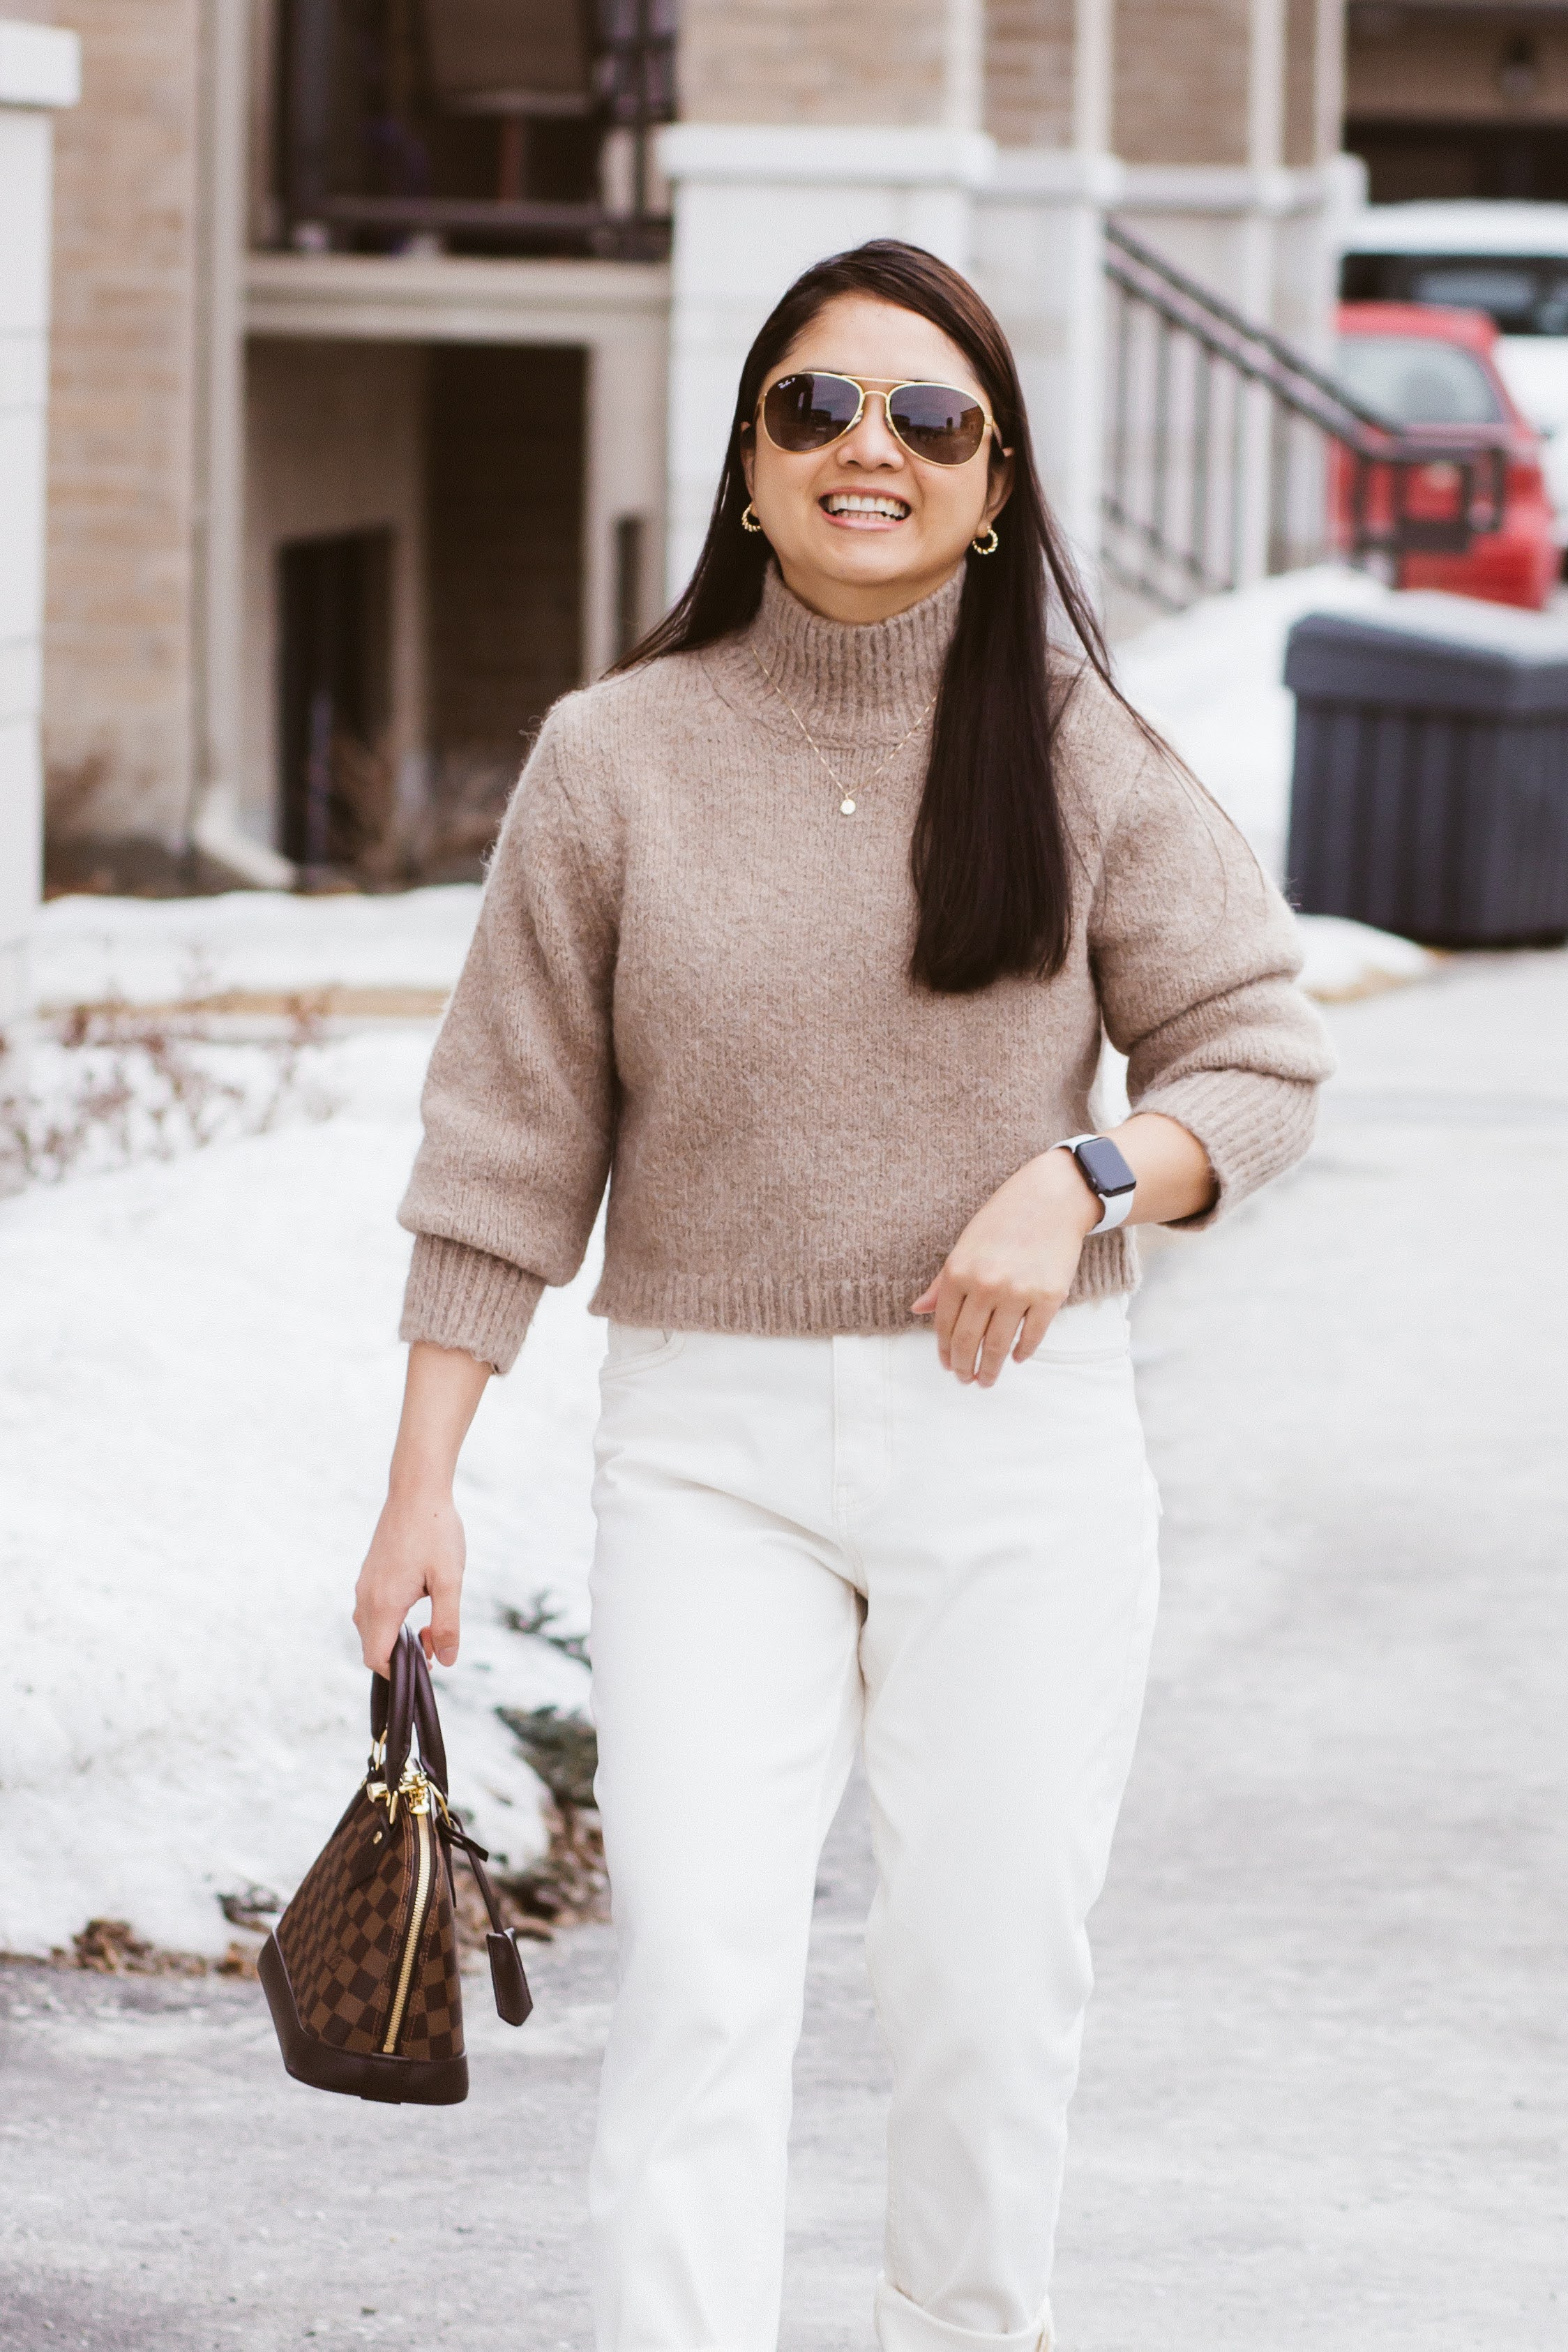 Louis Vuitton AlmaBB | Ray-Ban Polarized Sunglasses | Vince Camuto Ankle Booties | Mango White Jeans | Zara Crop Sweater | Petite Spring Outfit Idea | Working Mom Style